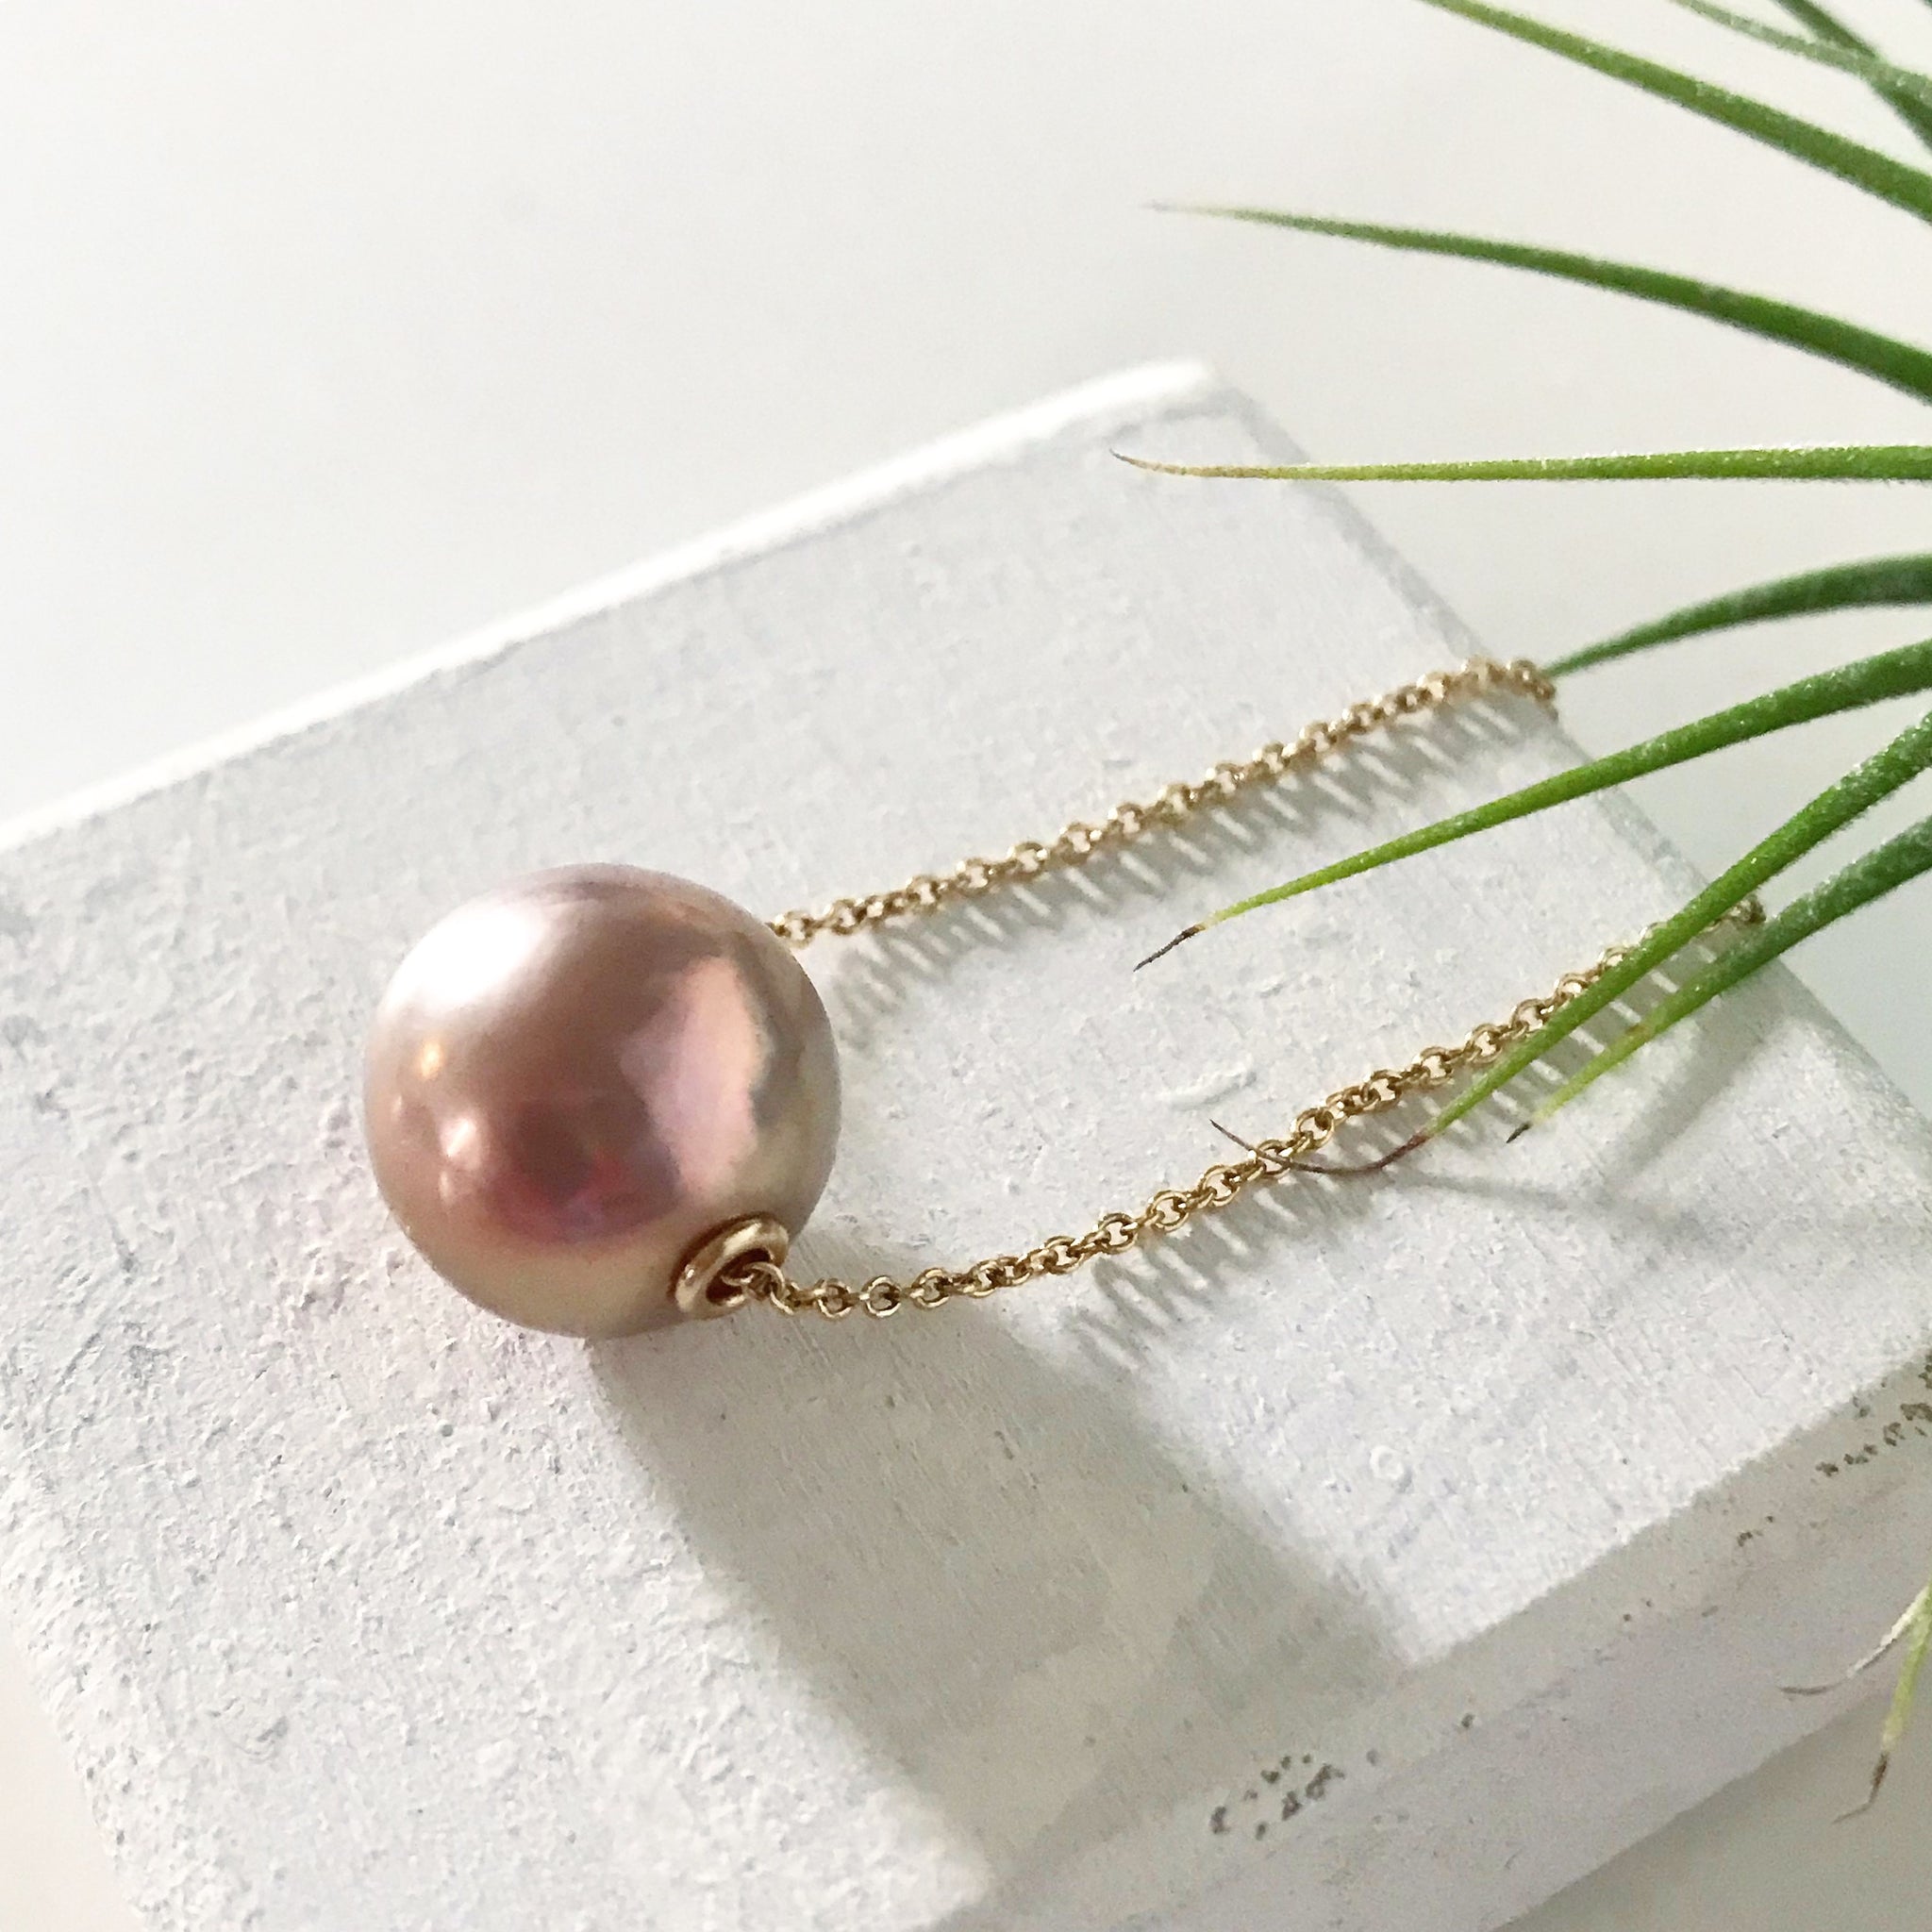 Single Pearl Necklace, White Pearl Necklace, Floating Pearl Gold Necklace,  Bridsmaid Gift, Freshwater Pearl Necklace, June Birthstone - Etsy | Single pearl  necklace, Simple necklace, White pearl necklace